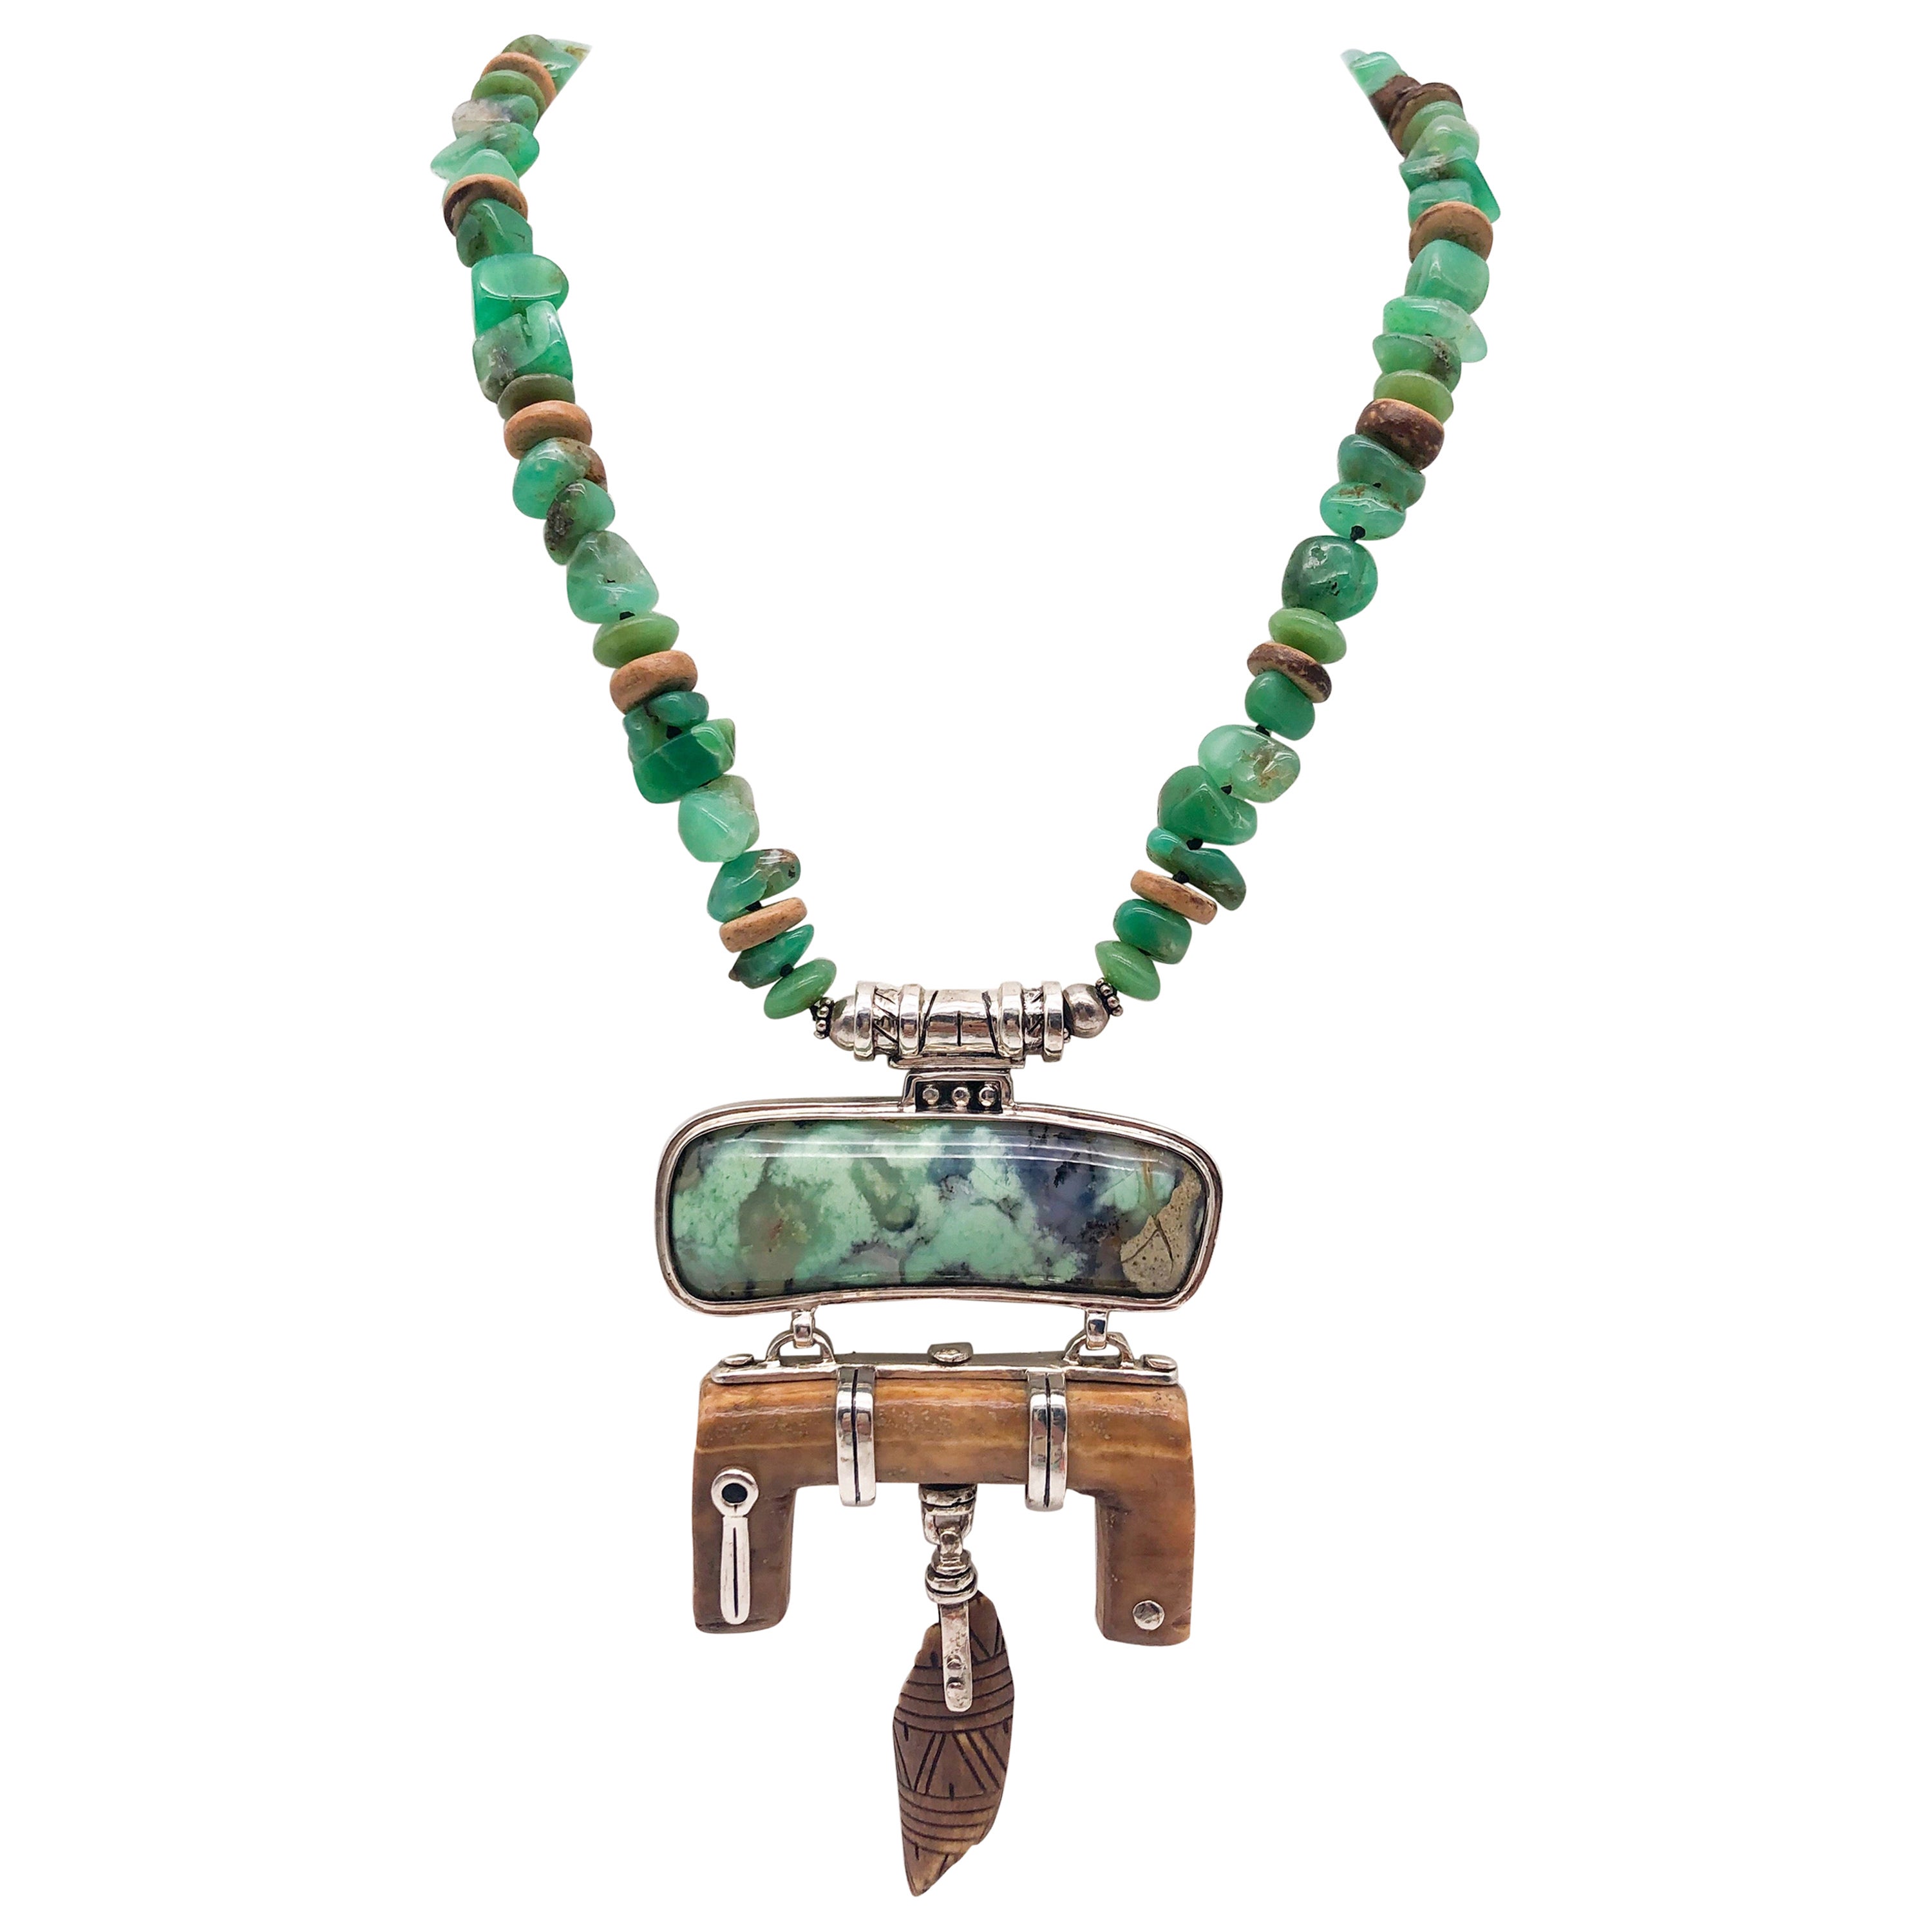 A.Jeschel Carved Fossil Pendant suspendend from a rich green Chrysoprase stones